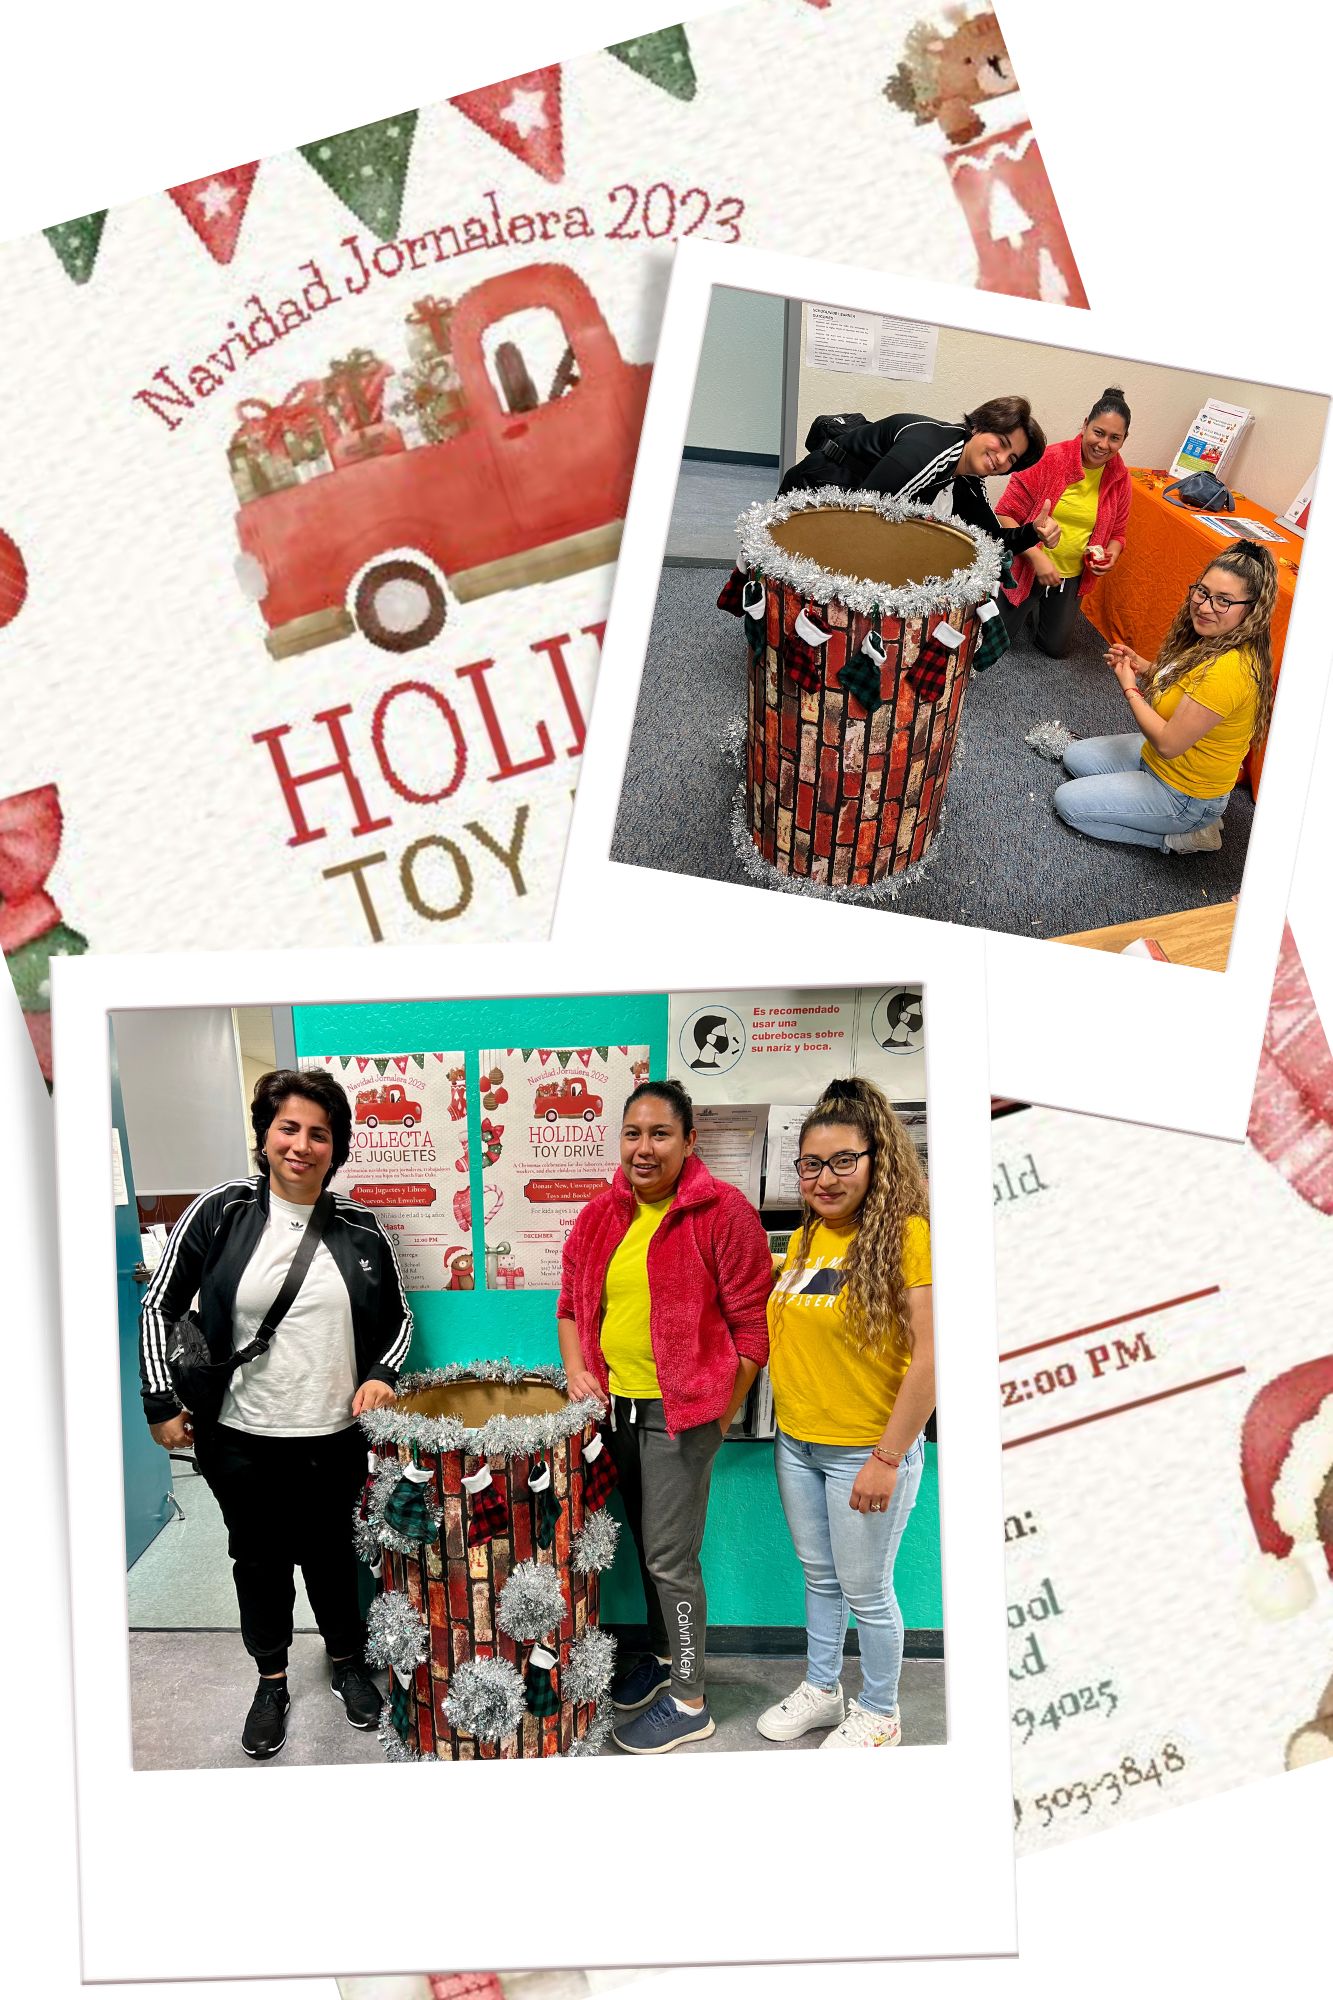 students decorating toy bin for the holiday toy drive benefiting families of day laborers and domestic workers. 